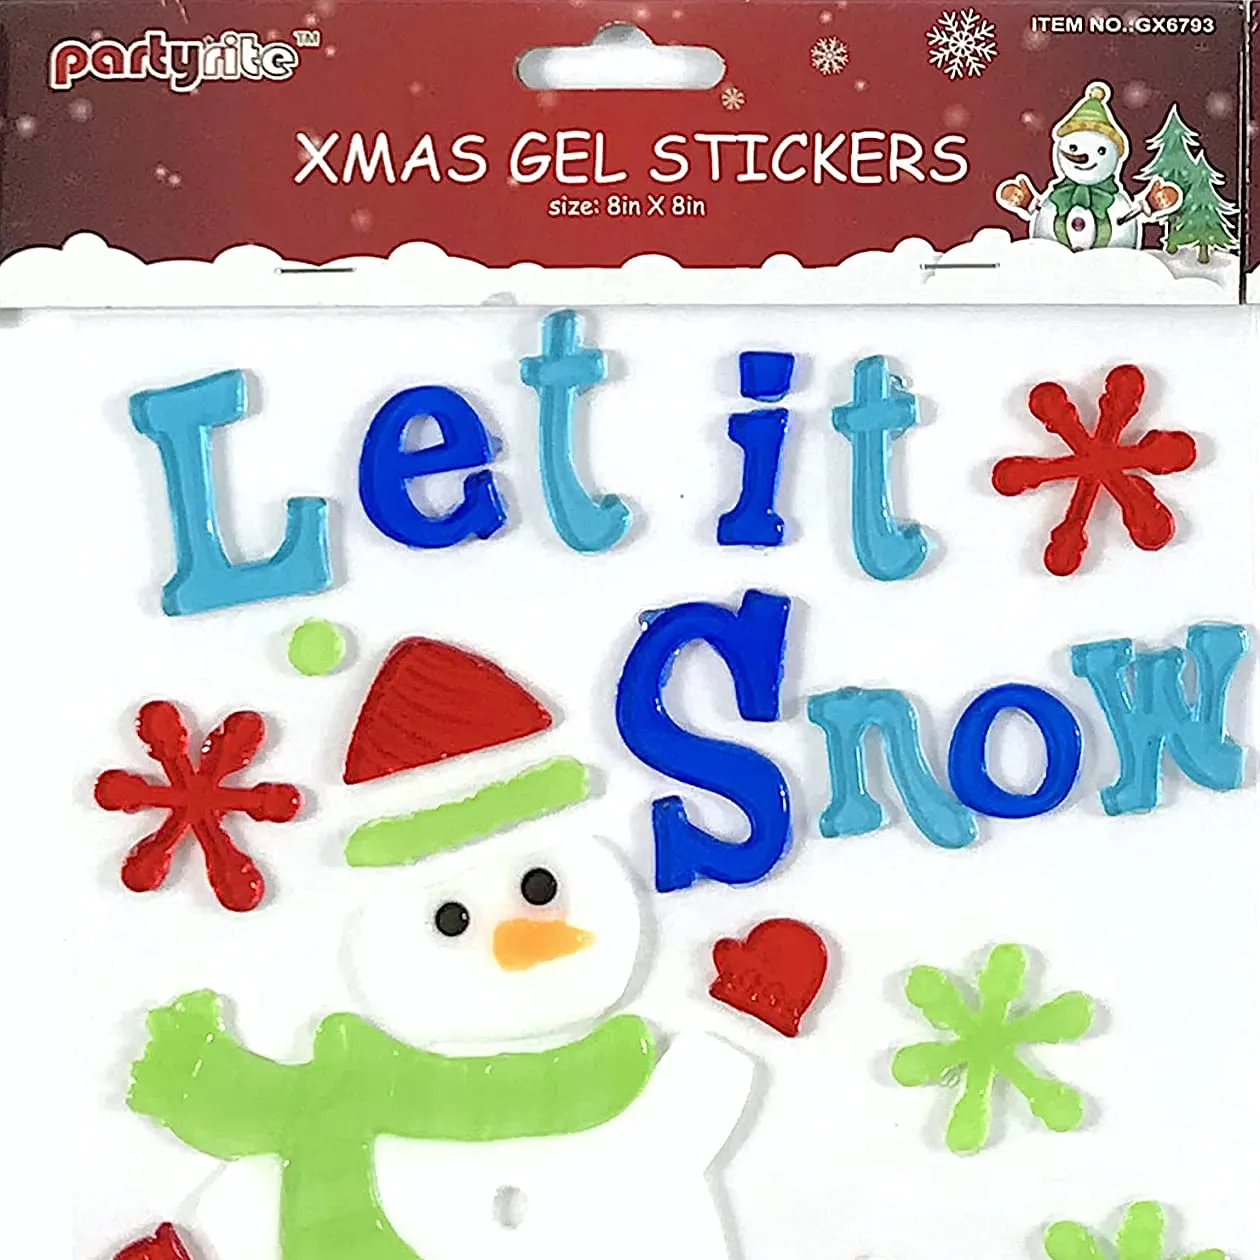 What are Christmas stickers